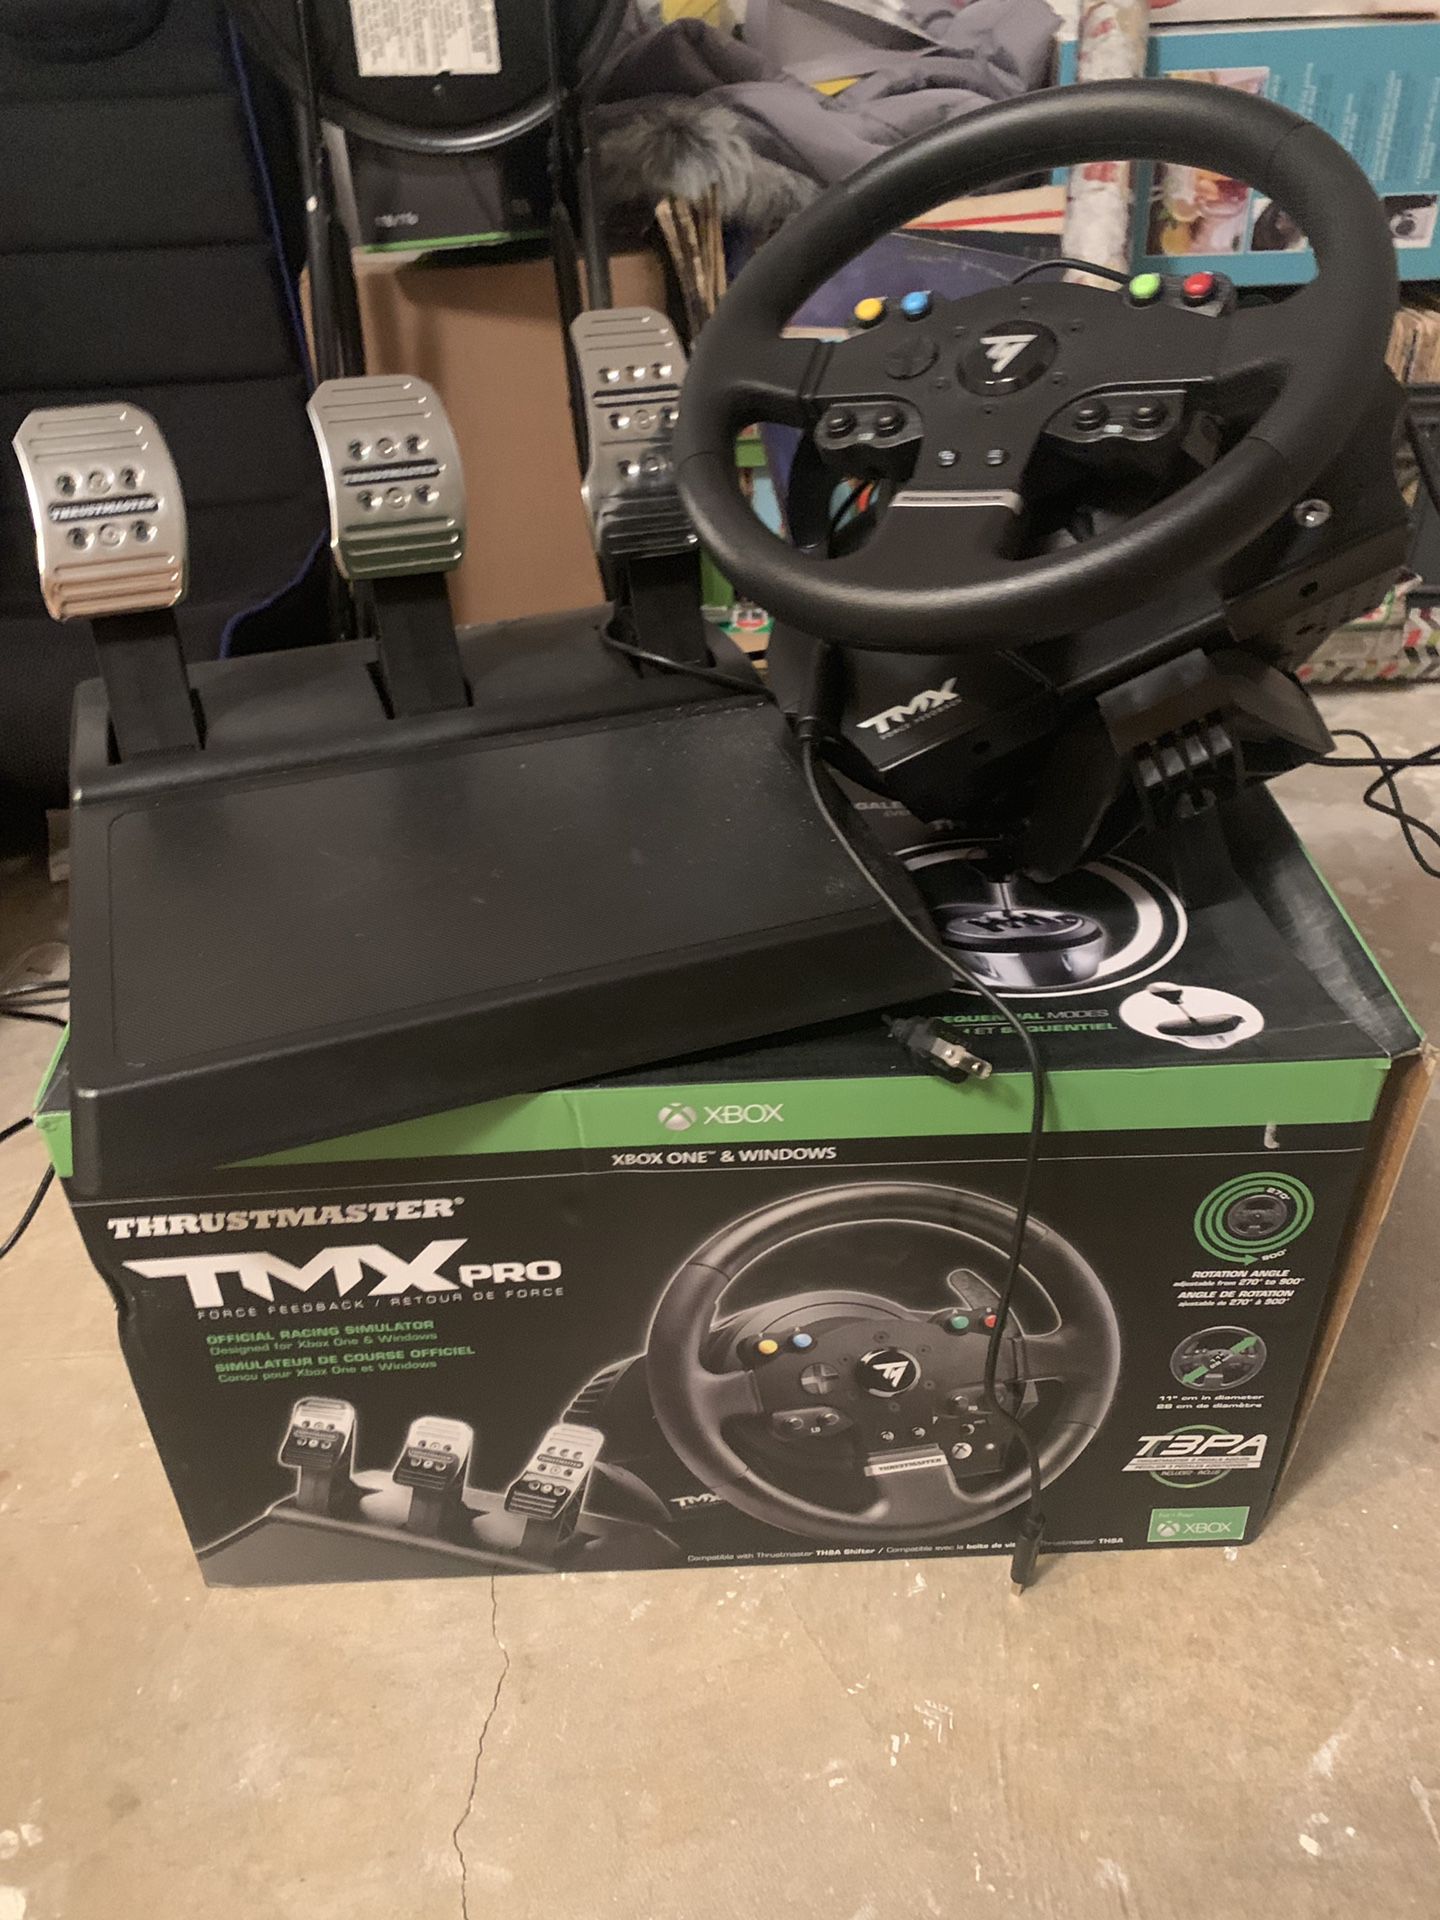 Thrustmaster TMX Force Pro Wheel & Pedals Set for PC and XBox One